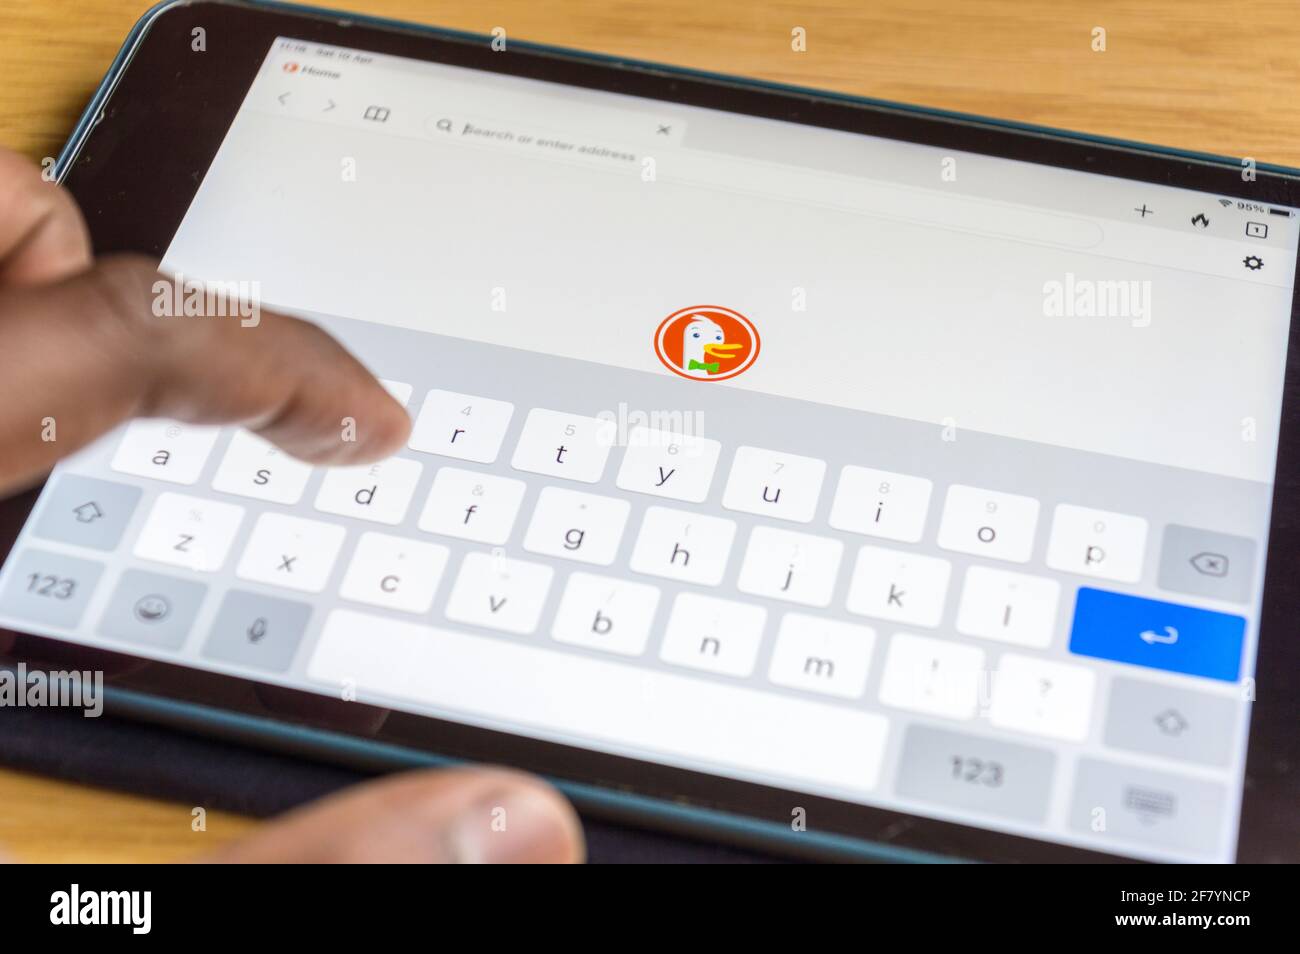 Adult male typing on ipad keypad on Duck duck go interner browser Stock Photo